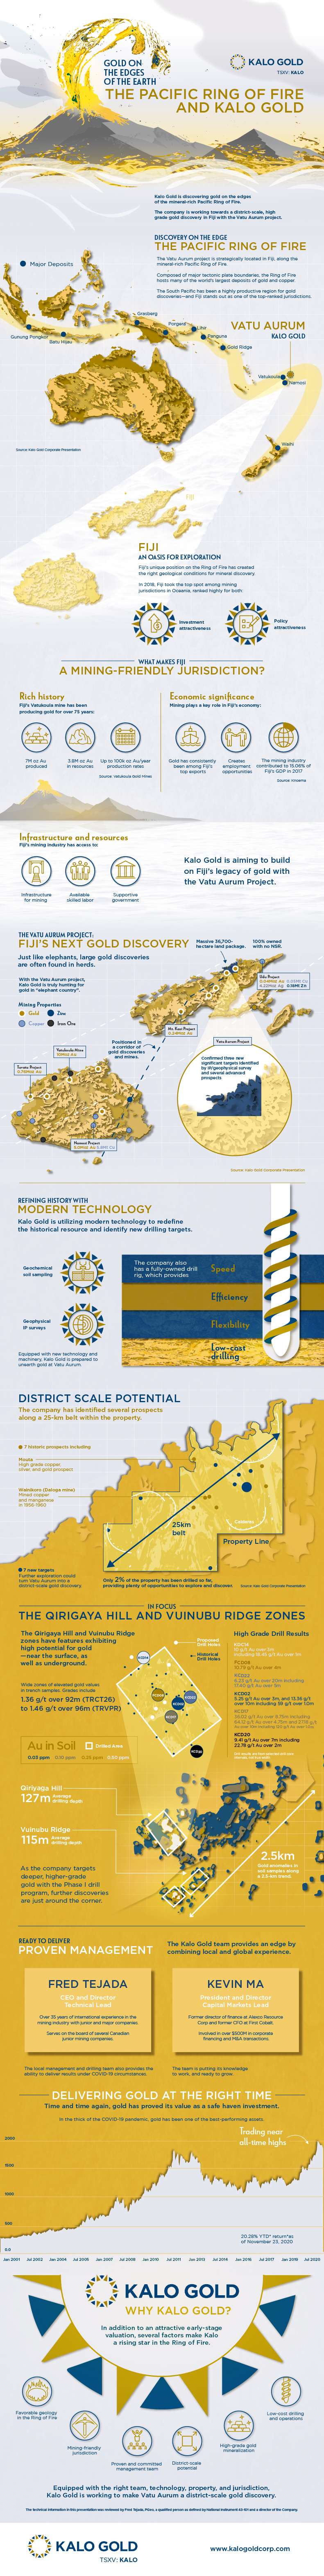 Kalo Gold Infographic